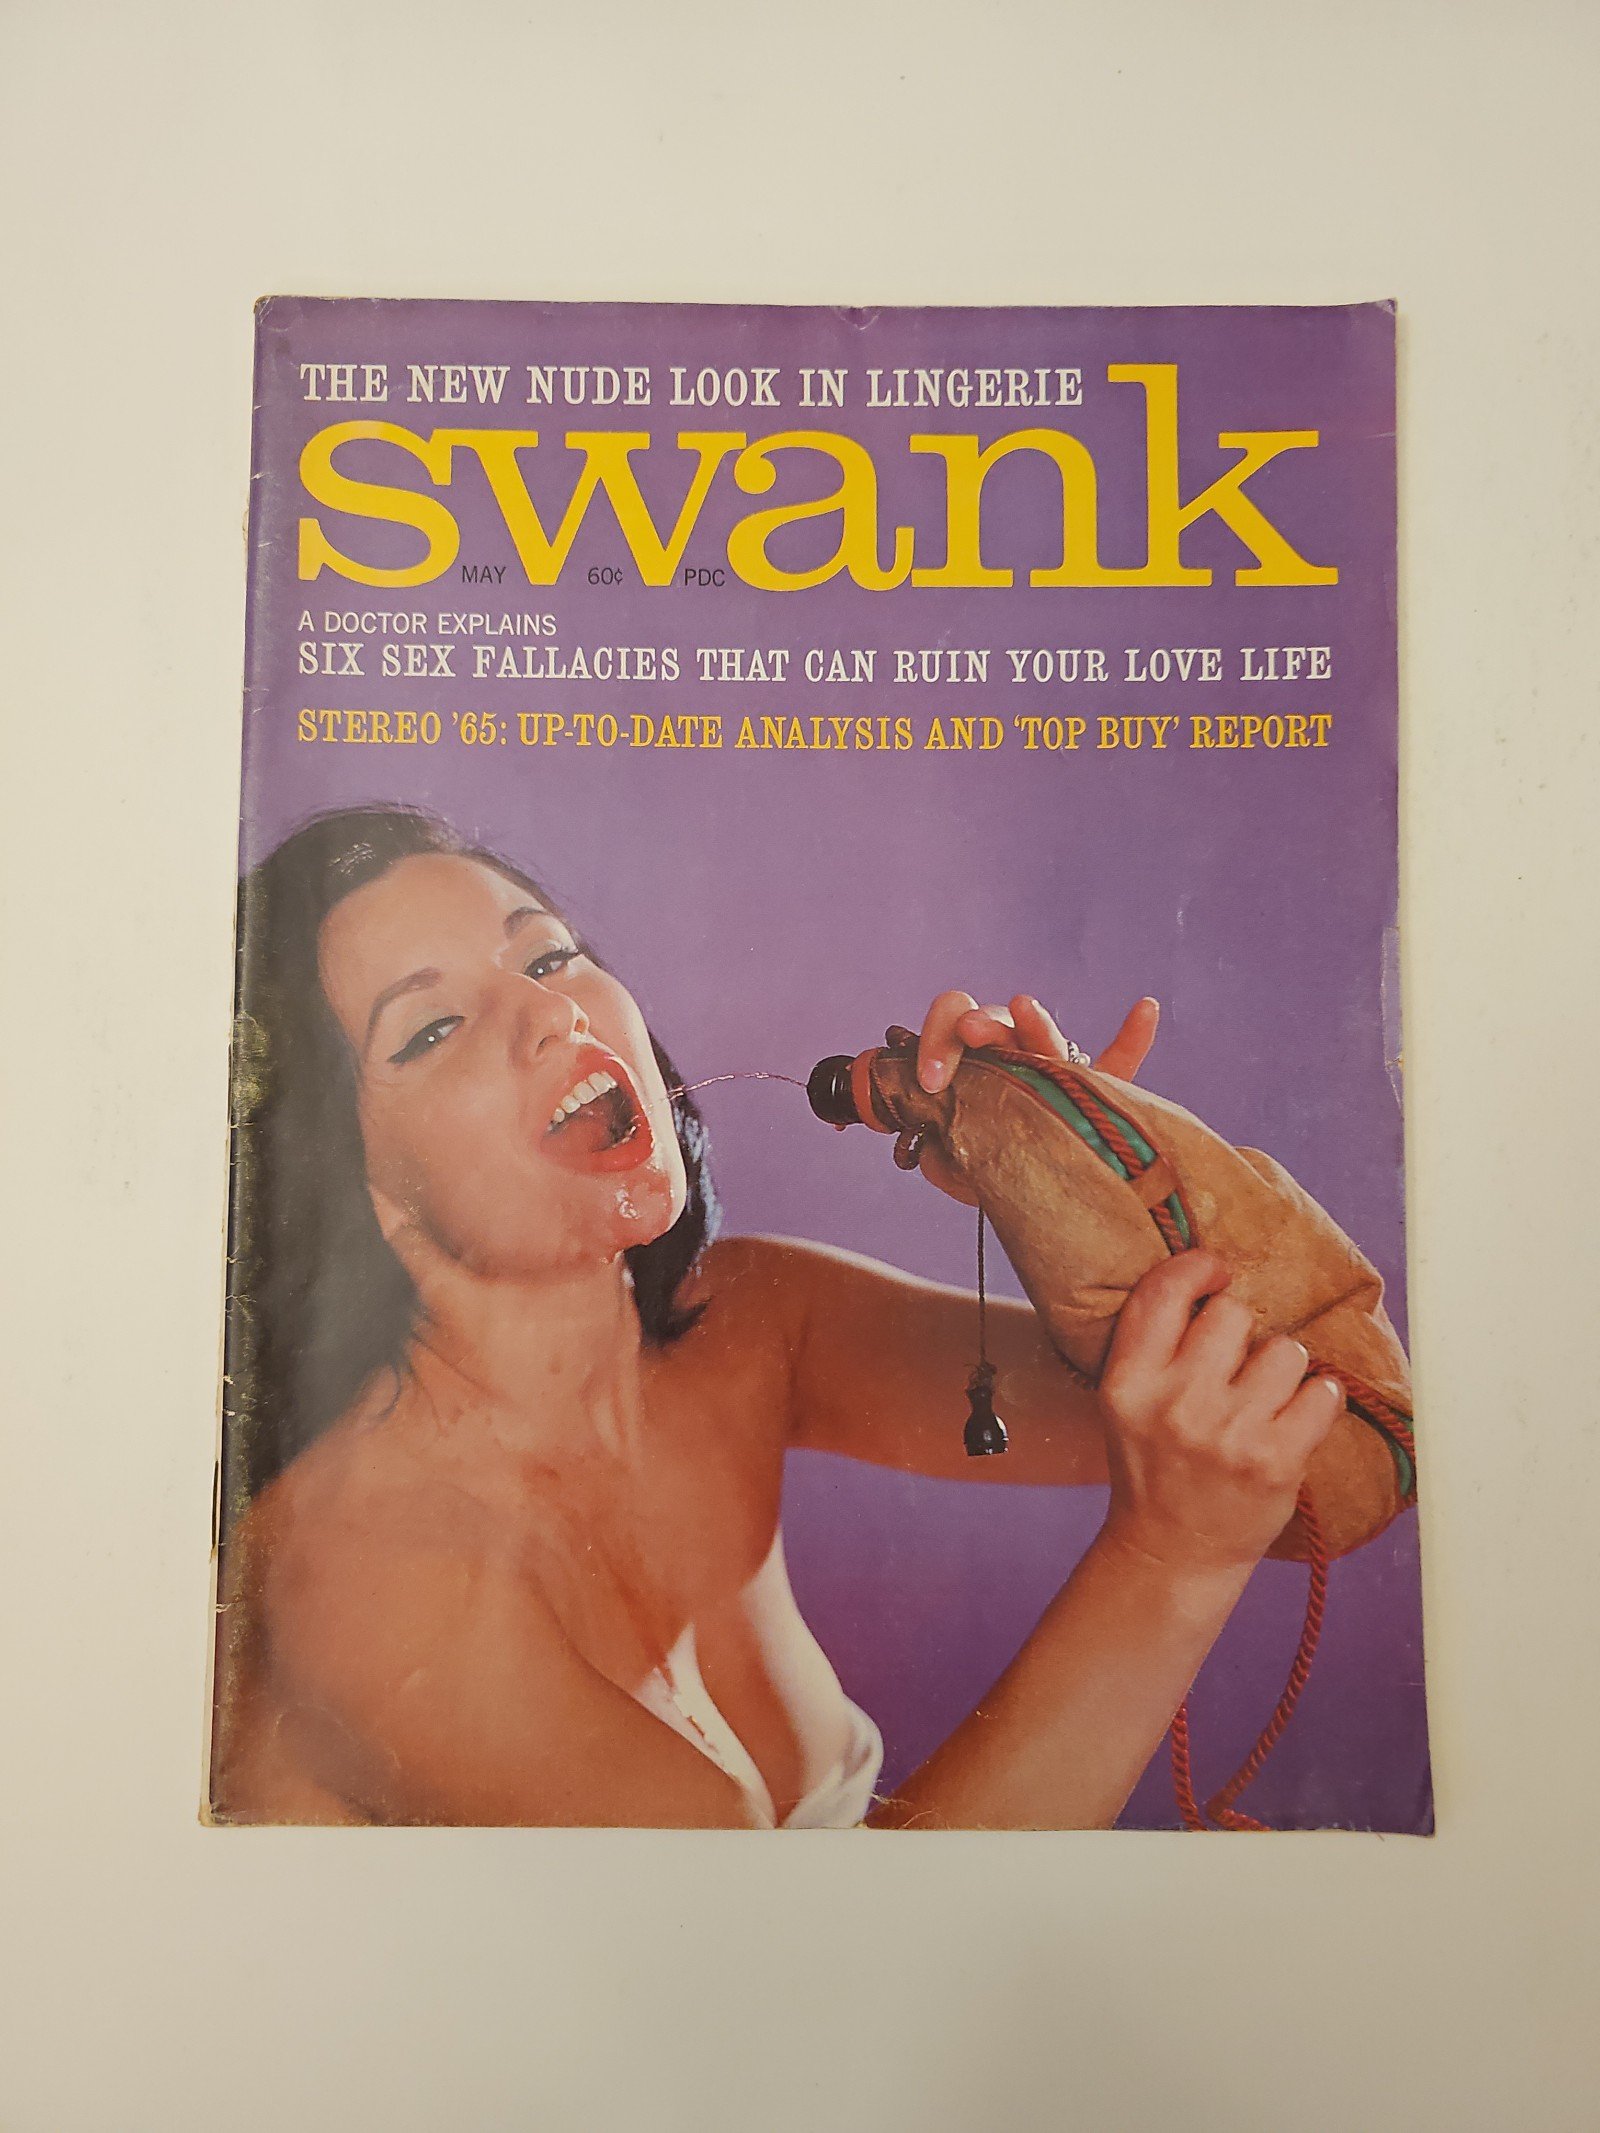 Swank Magazine - May 1965 - Vol 12 No 2 - The New Nude Look in Lingerie q7xuwZJgh